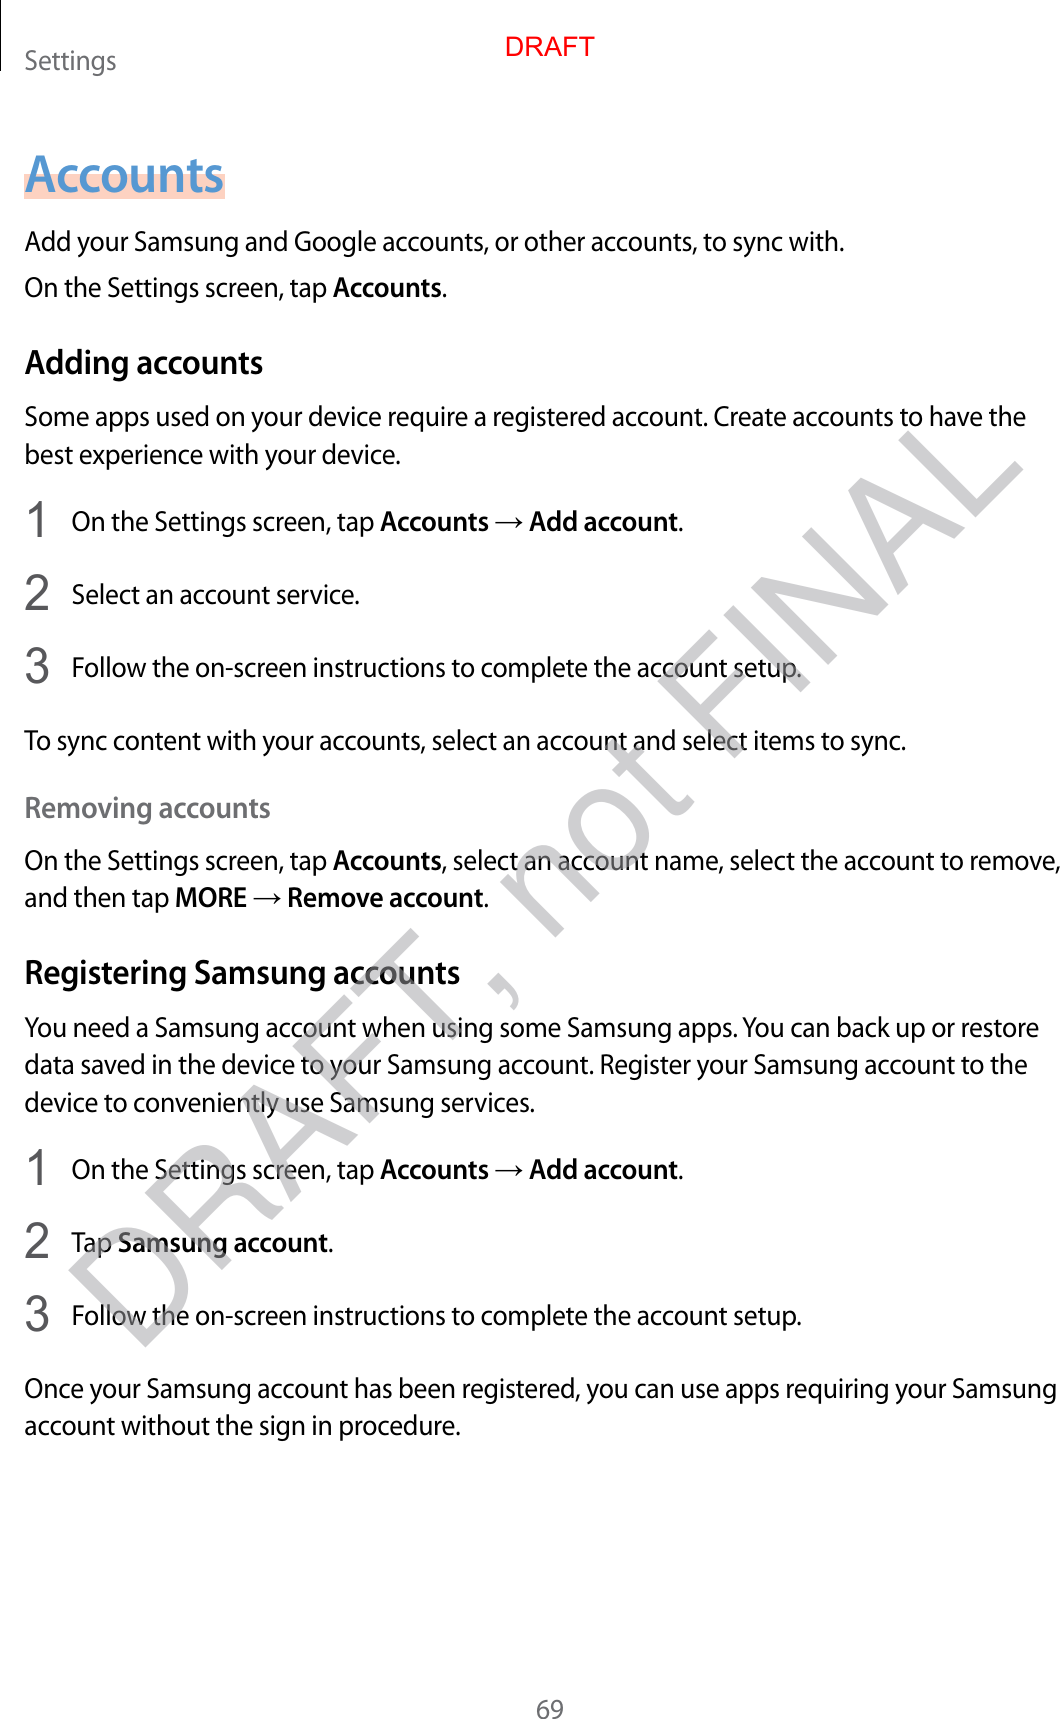 Settings69AccountsAdd your Samsung and Google accounts, or other accounts, to sync with.On the Settings screen, tap Accounts.Adding accountsSome apps used on your device require a registered account. Create accounts to have the best experience with your device.1  On the Settings screen, tap Accounts → Add account.2  Select an account service.3  Follow the on-screen instructions to complete the account setup.To sync content with your accounts, select an account and select items to sync.Removing accountsOn the Settings screen, tap Accounts, select an account name, select the account to remove, and then tap MORE → Remove account.Registering Samsung accountsYou need a Samsung account when using some Samsung apps. You can back up or restore data saved in the device to your Samsung account. Register your Samsung account to the device to conveniently use Samsung services.1  On the Settings screen, tap Accounts → Add account.2  Tap Samsung account.3  Follow the on-screen instructions to complete the account setup.Once your Samsung account has been registered, you can use apps requiring your Samsung account without the sign in procedure.DRAFTDRAFT, not FINAL